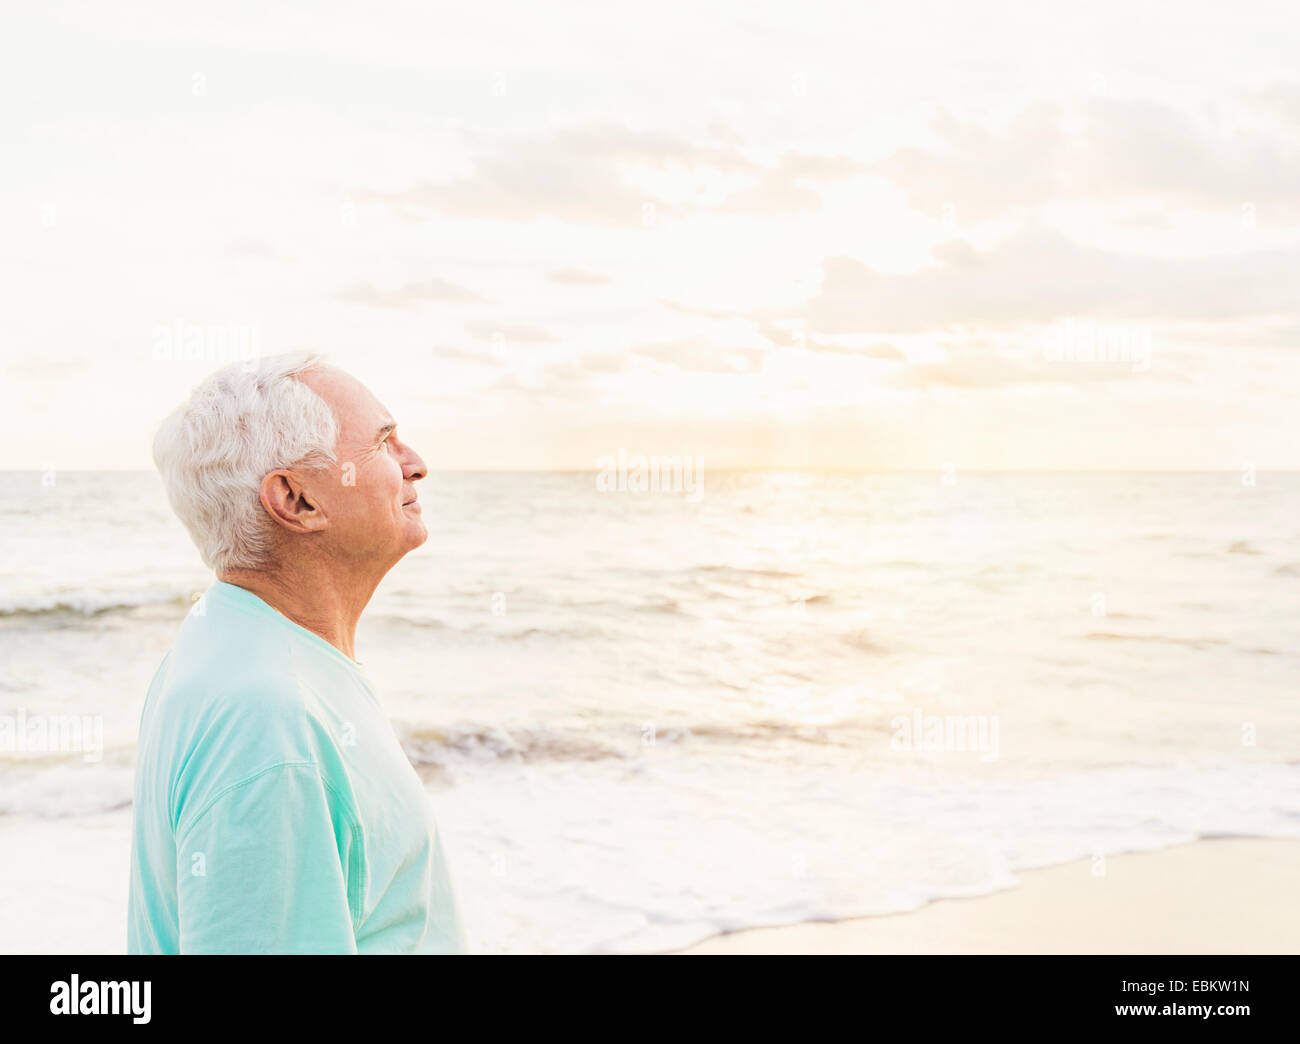 USA, Floride, Jupiter, Side view of senior woman smiling on beach Banque D'Images